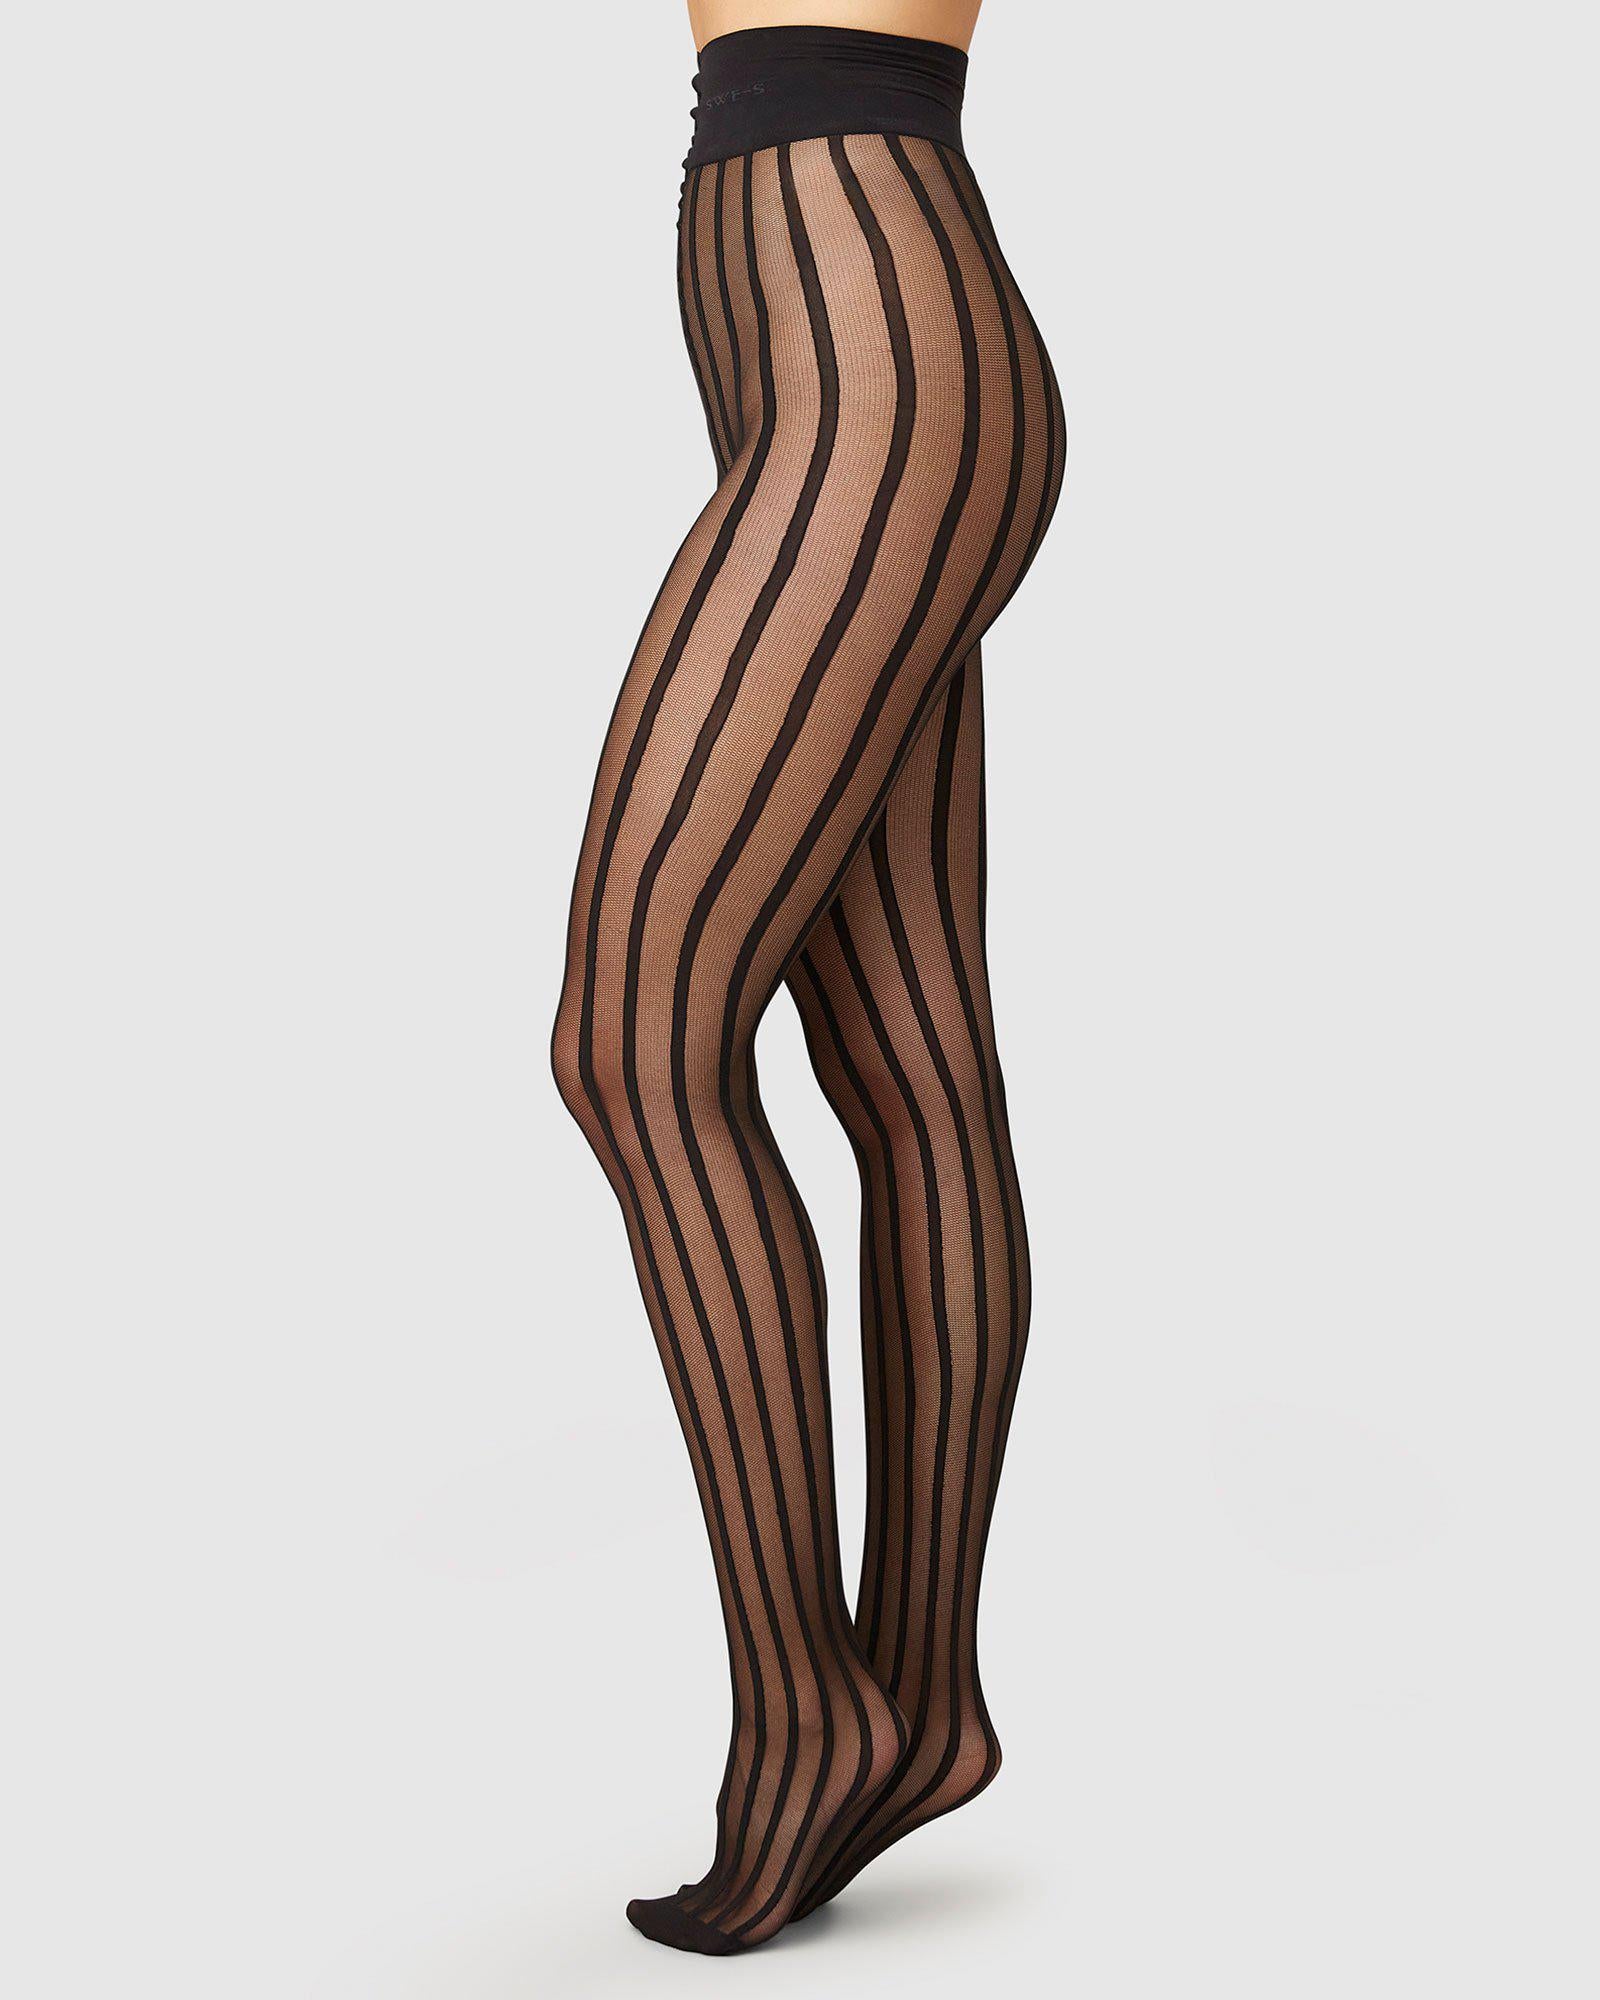 Vertical Striped Stockings 